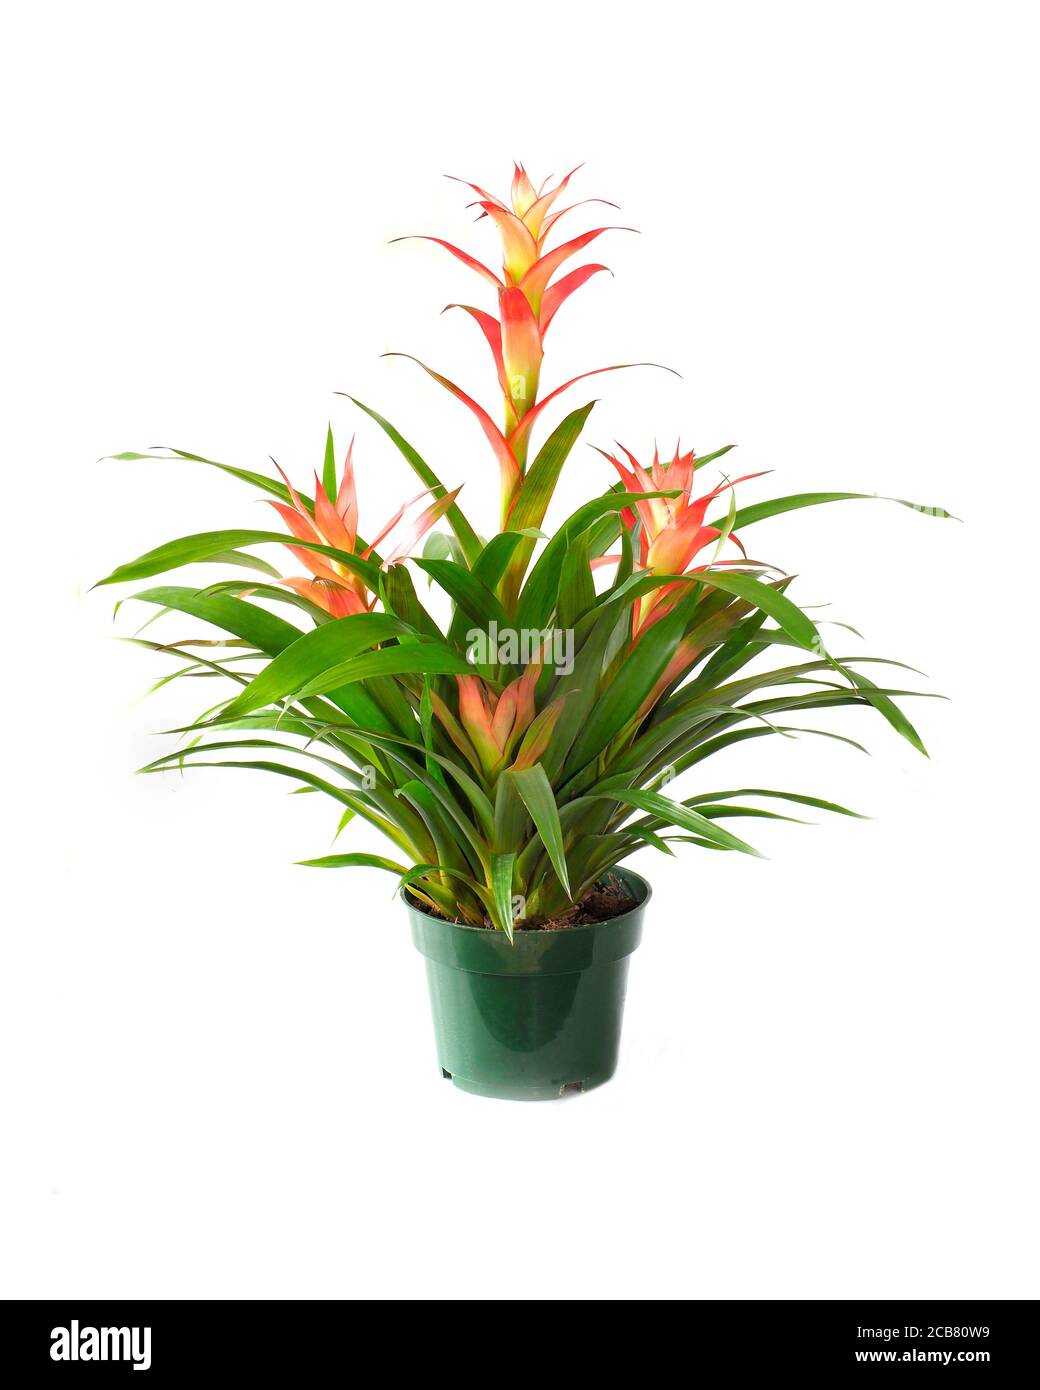 A Beautiful Potted Orange Vriesea Tropical Bromeliad Isolated on White Stock Photo